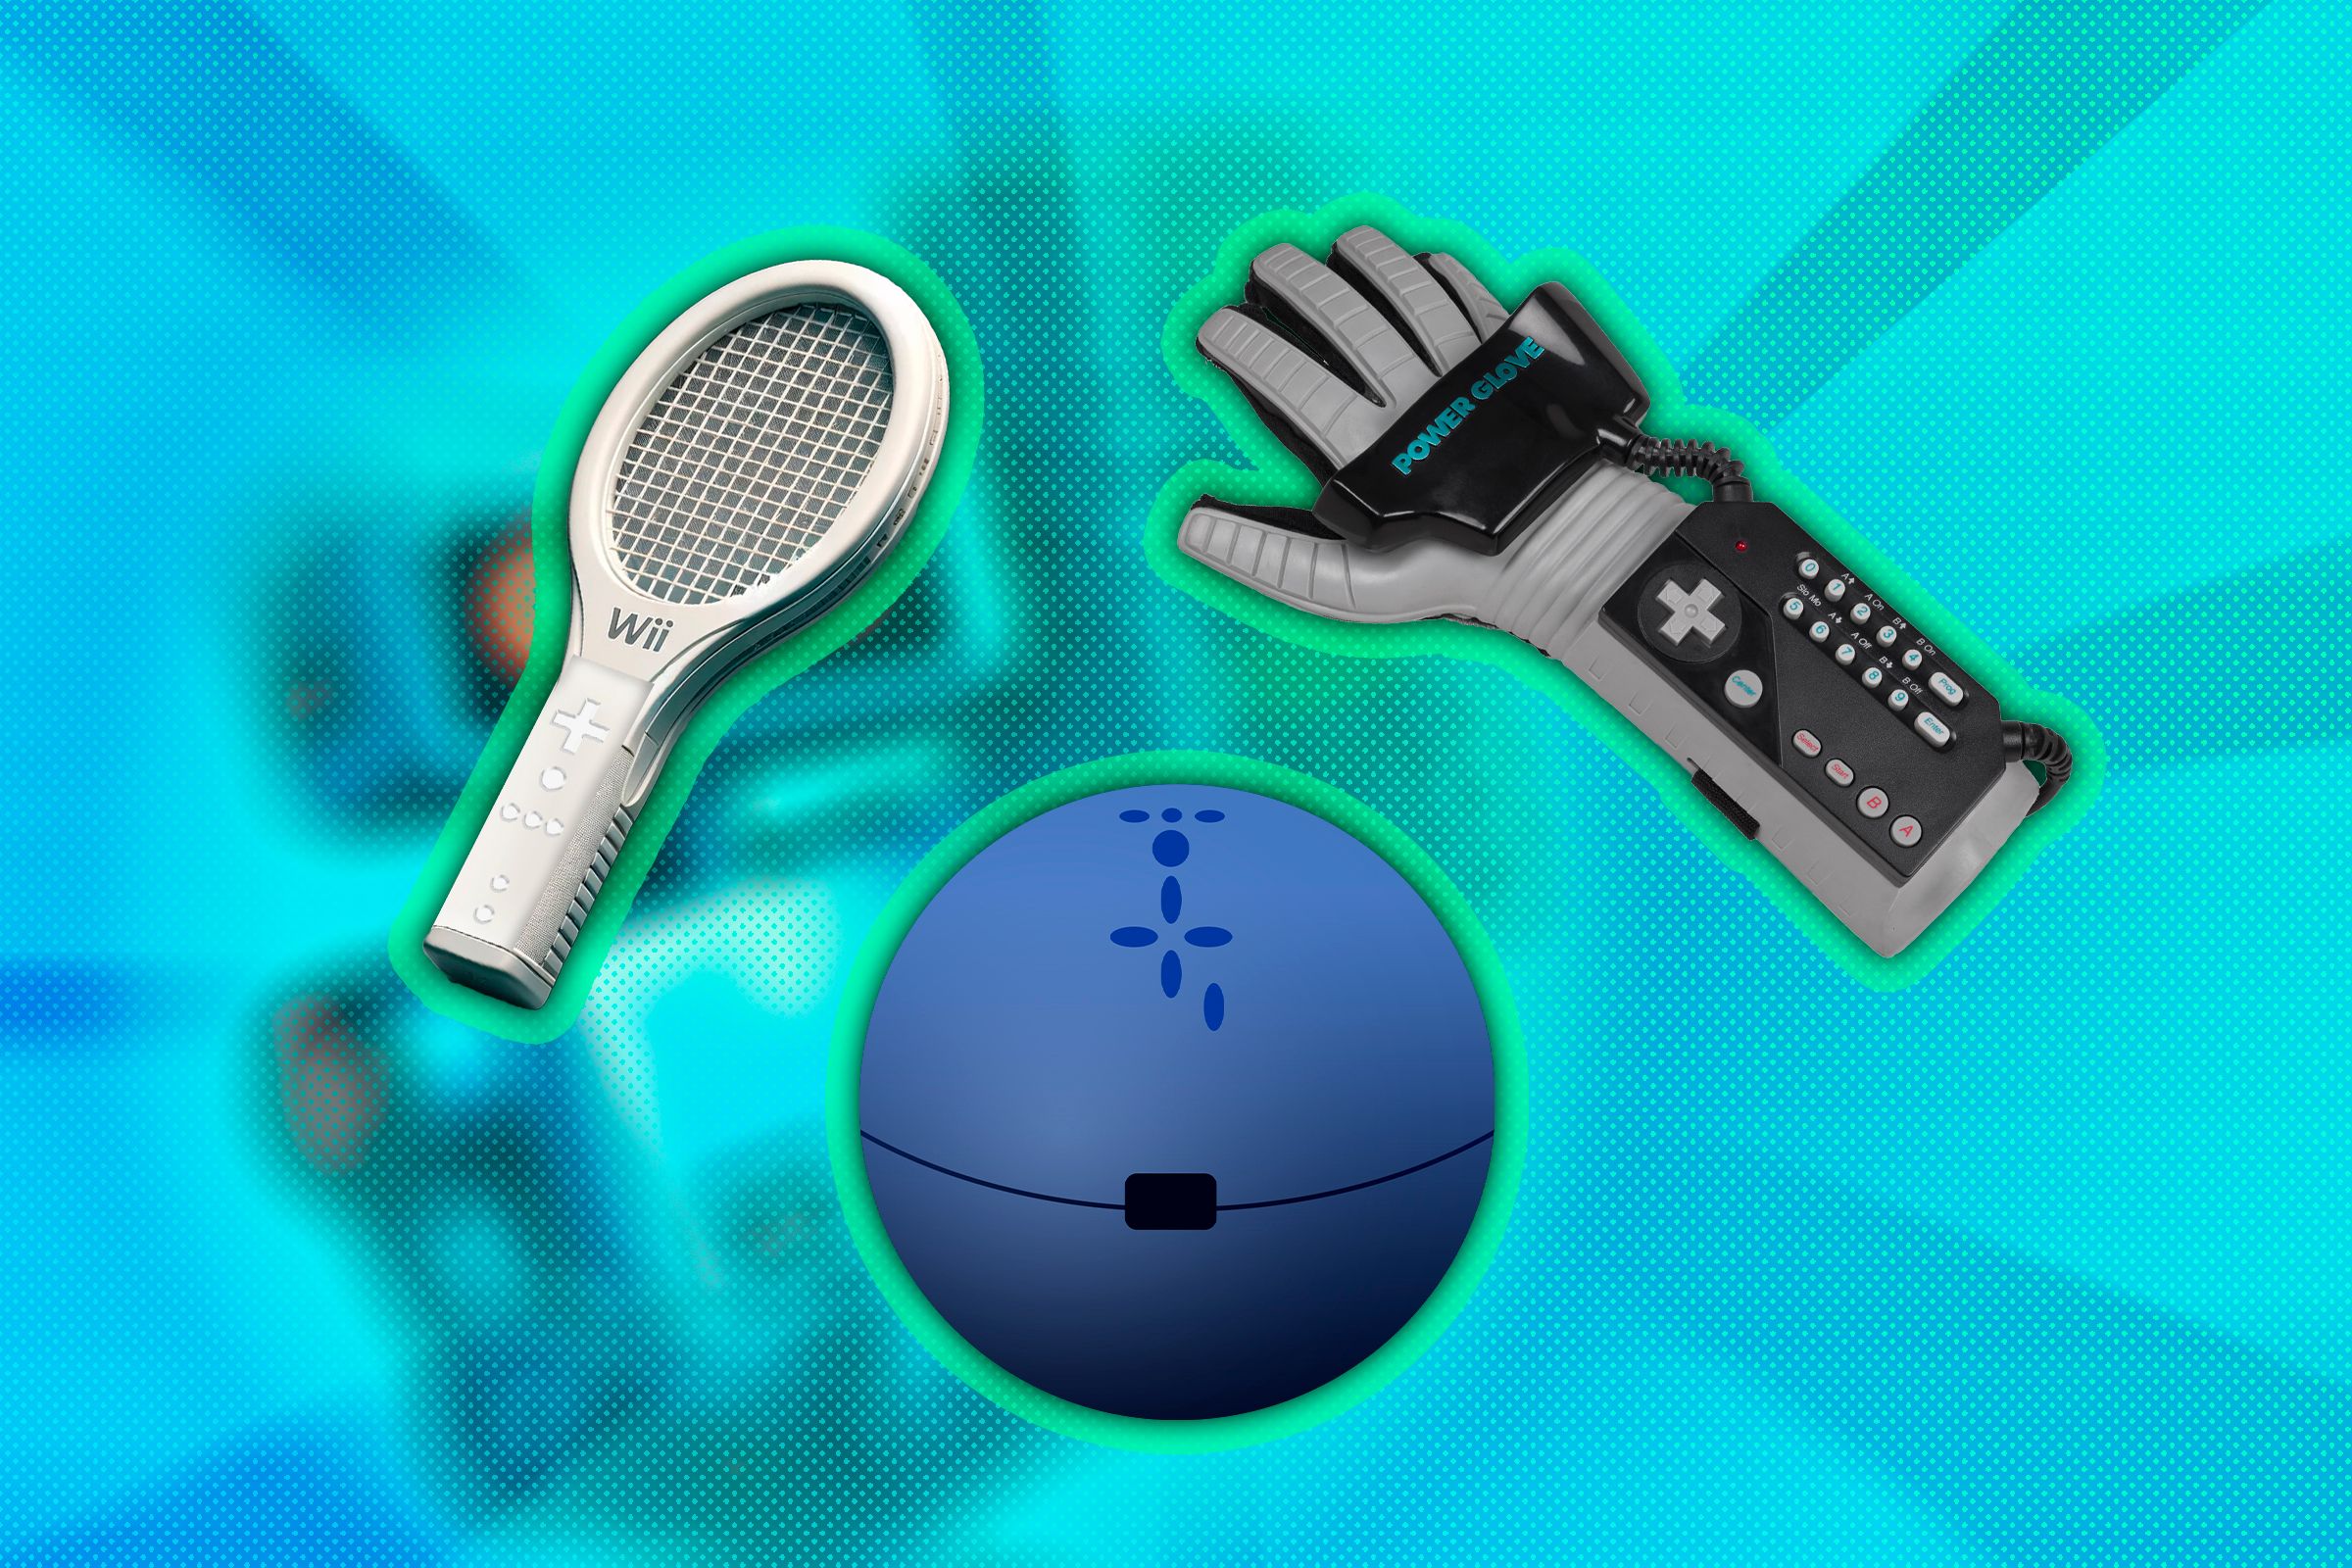 A Wii Tennis Racket, Bowling ball and a Power glove in the center of the screen.